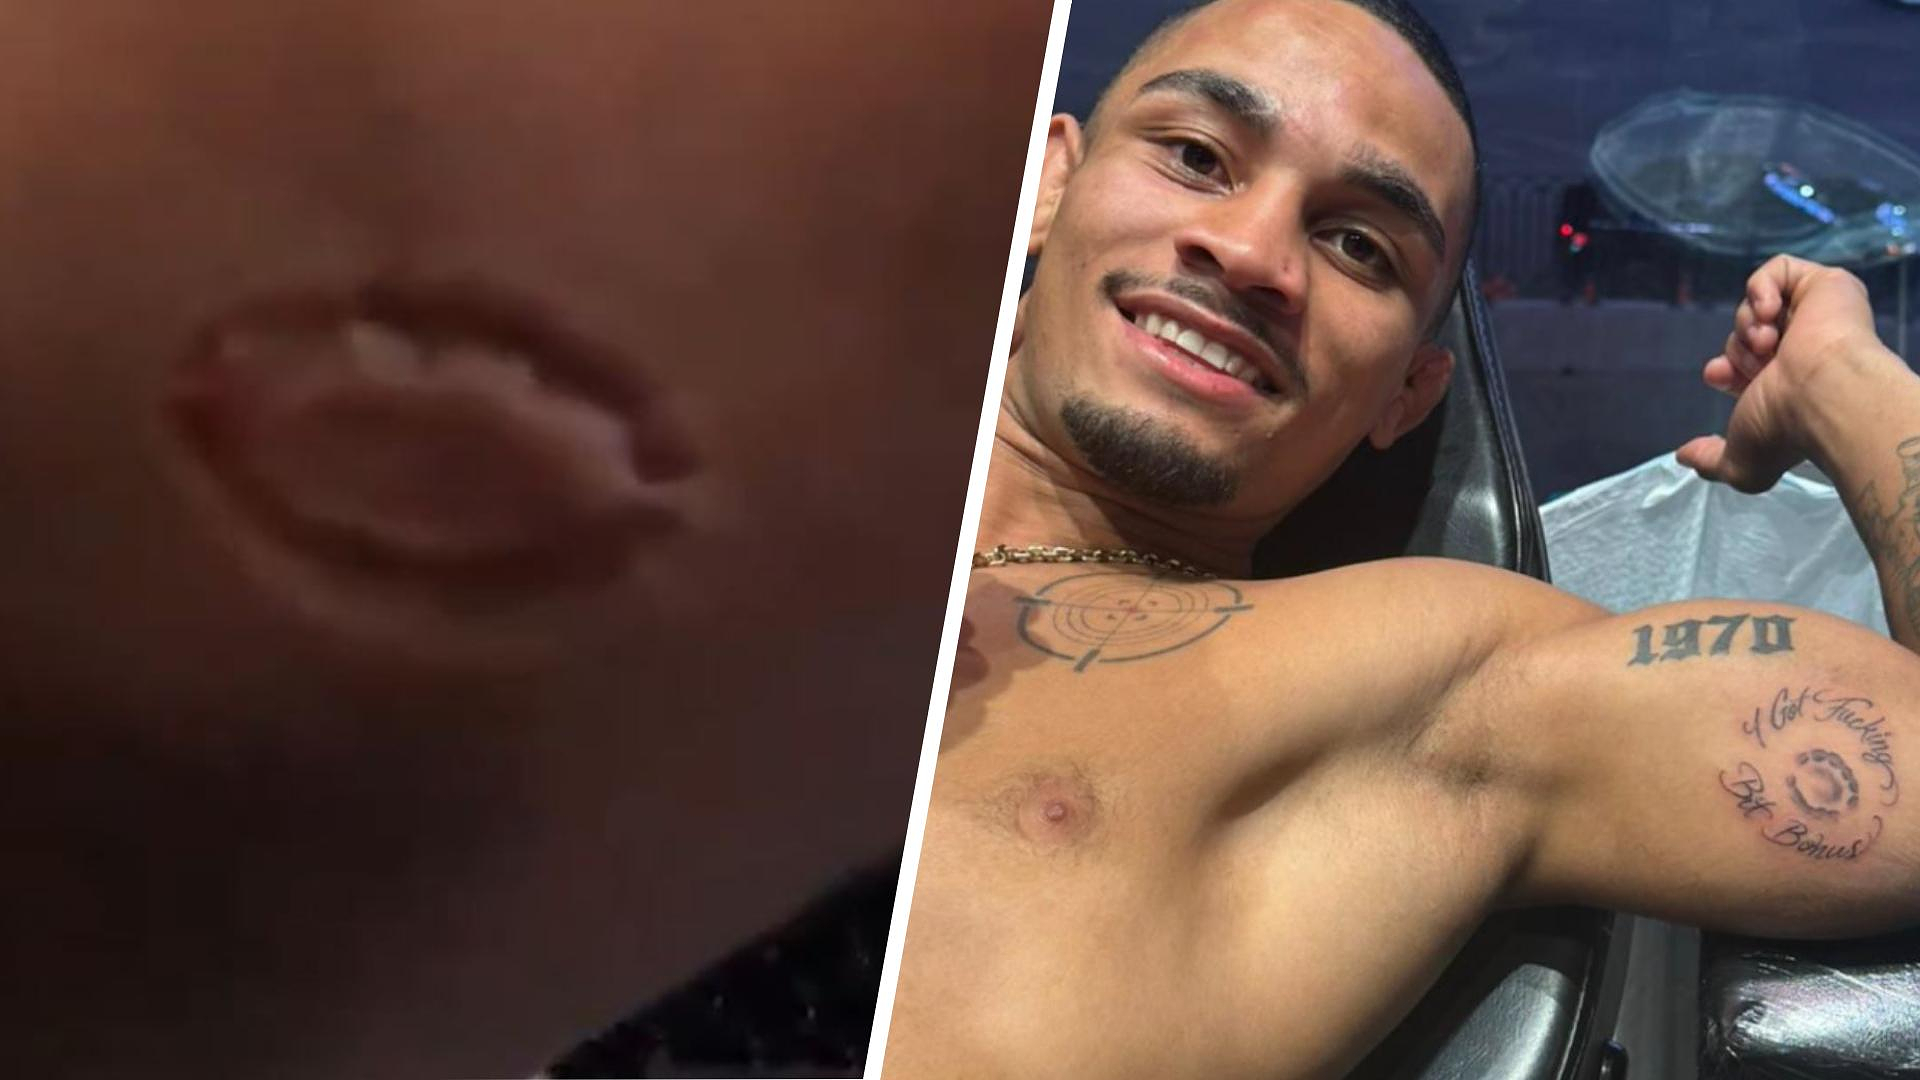 MMA: bitten by his opponent, he wins the fight and has teeth marks tattooed on his body